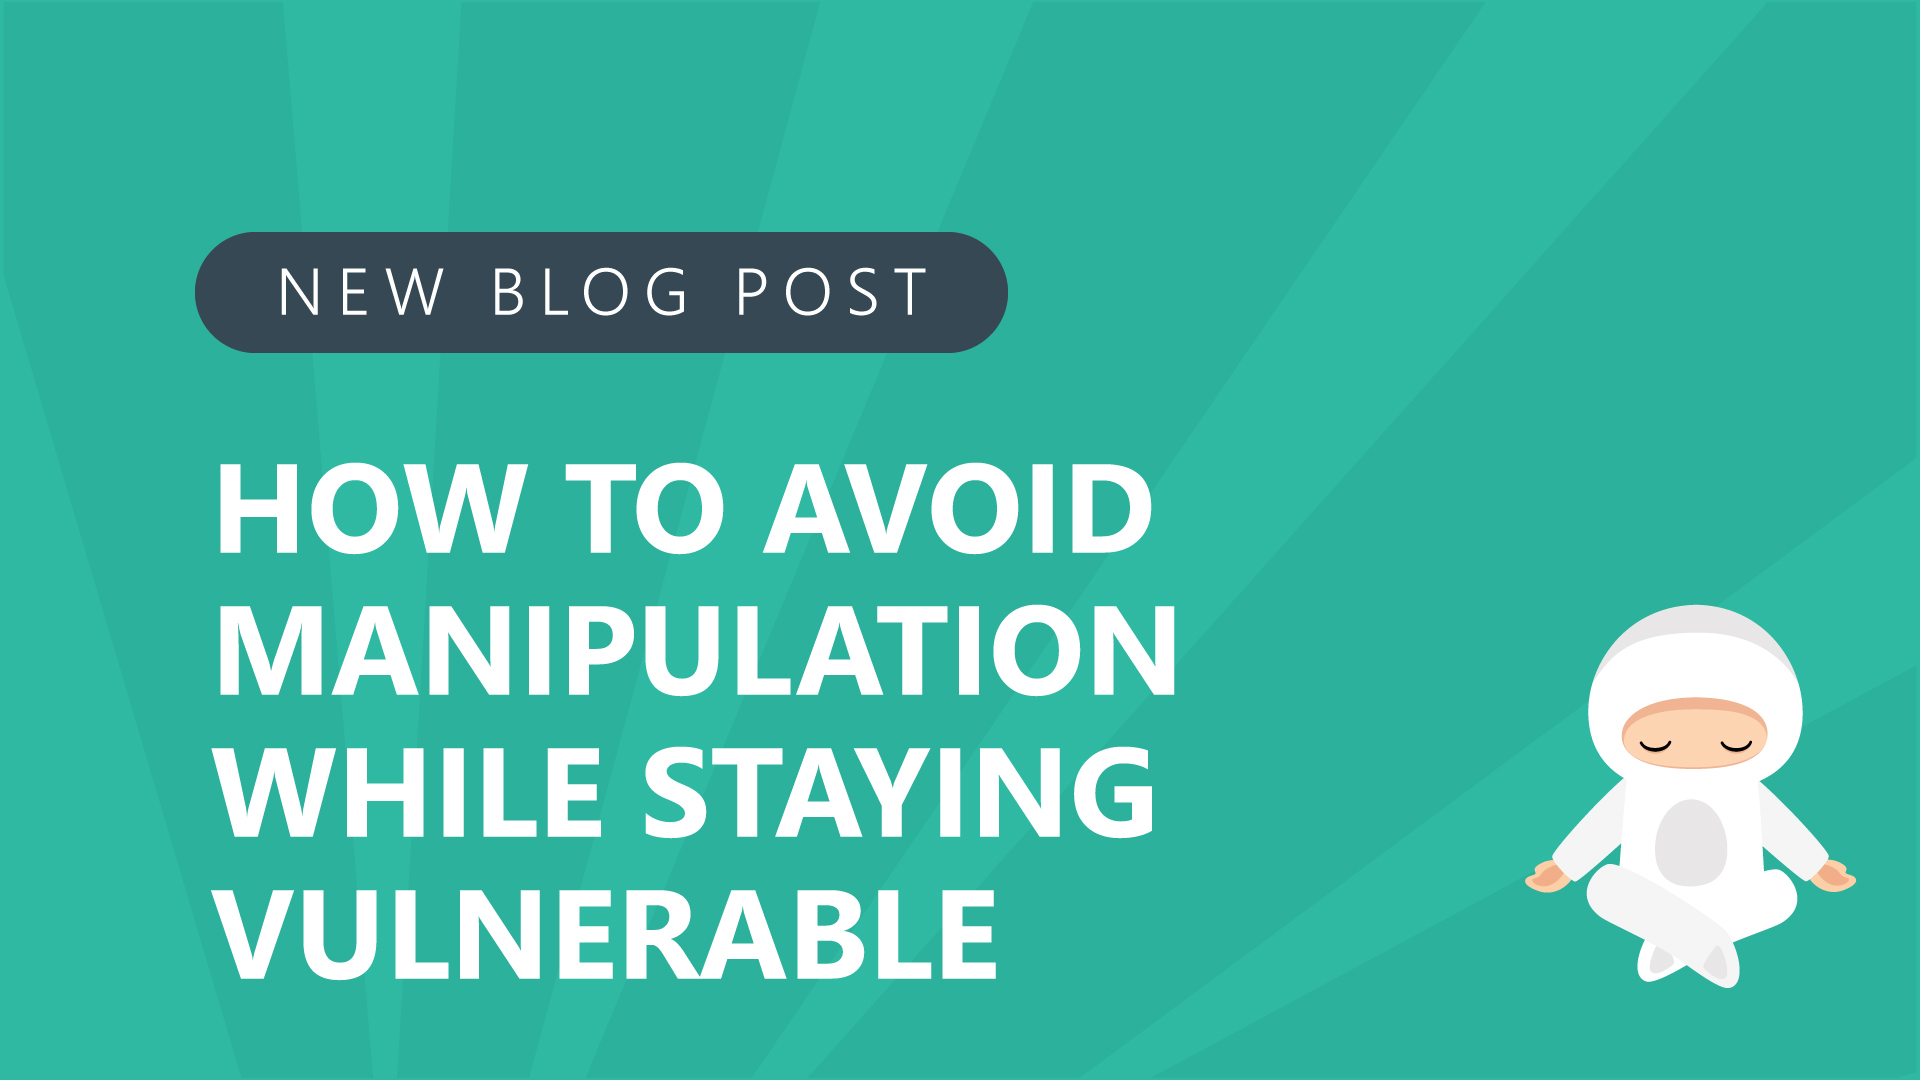 39-How-to-Avoid-Manipulation—While-Staying-Vulnerable.jpg